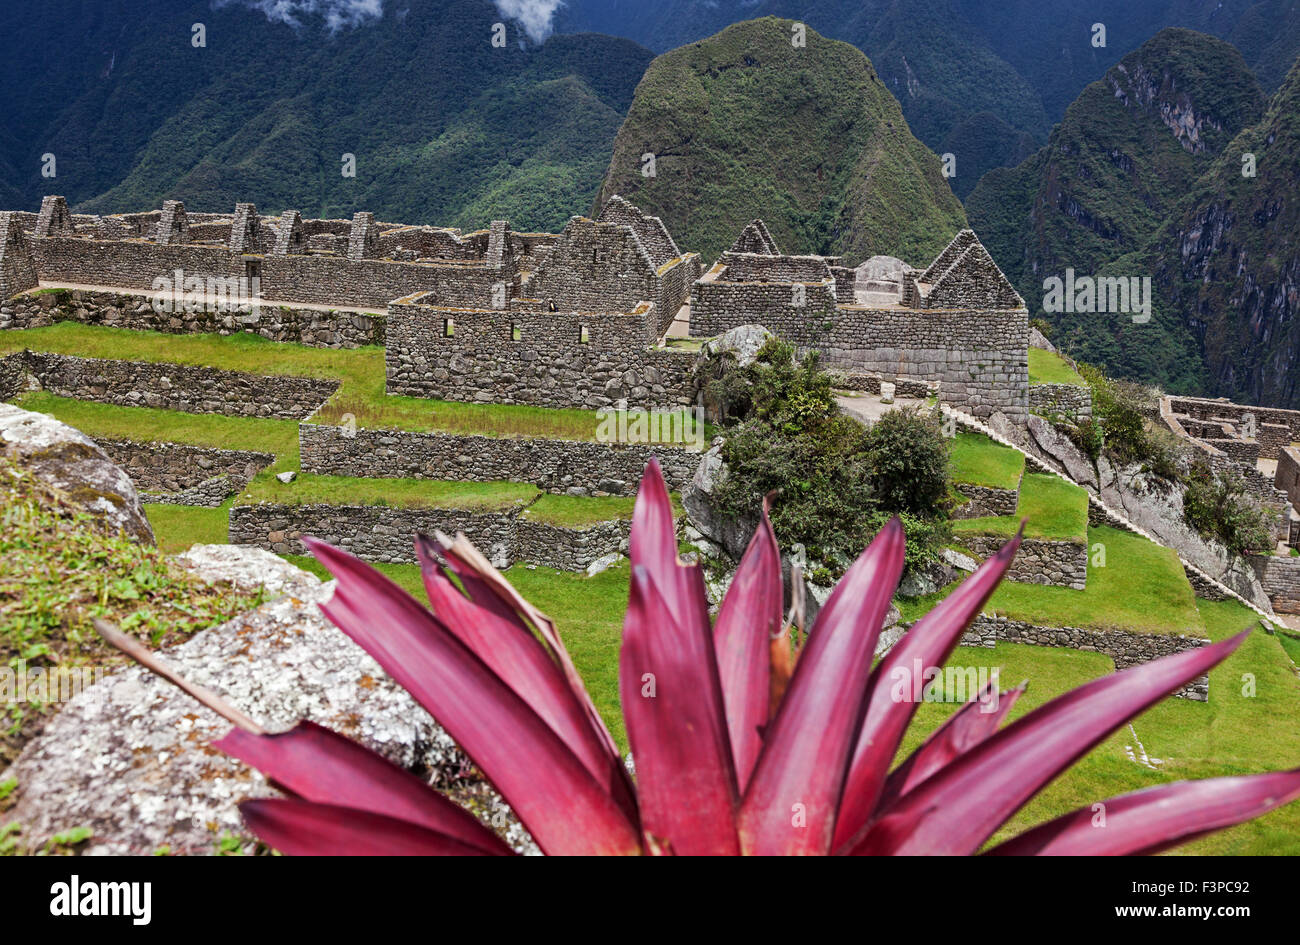 Colorful plant and the ruins of Machu Picchu, Peru. Stock Photo